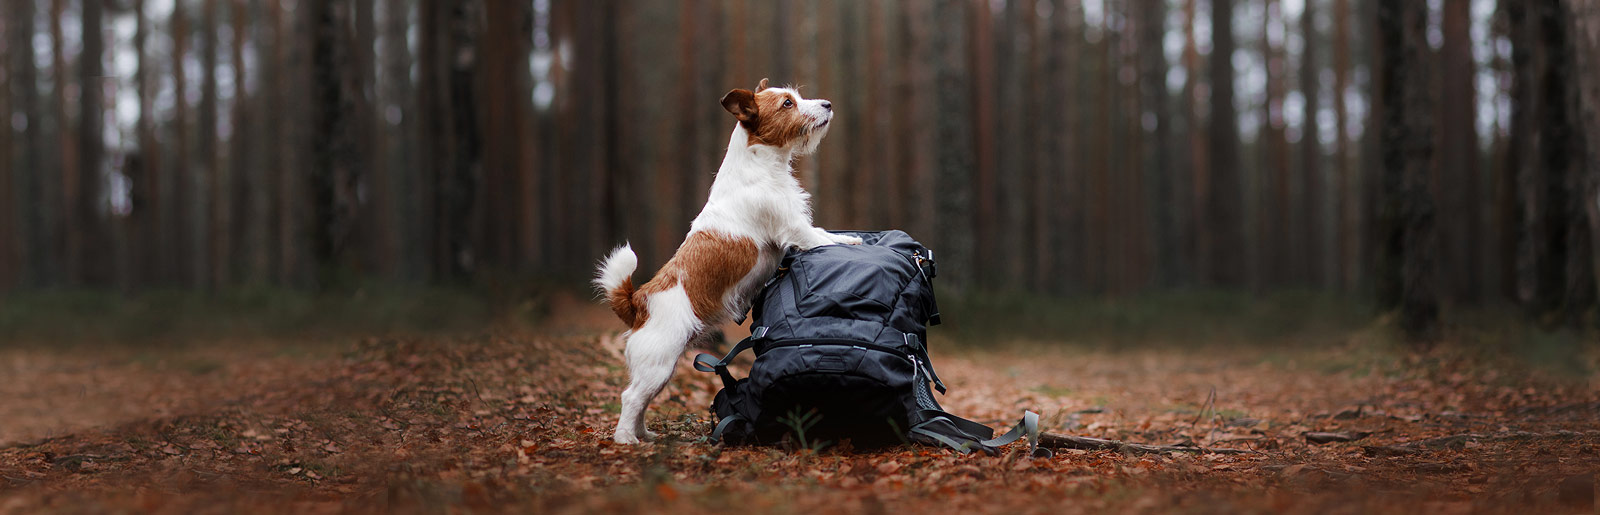 Tour into nature - Hiking adventure with your dog 